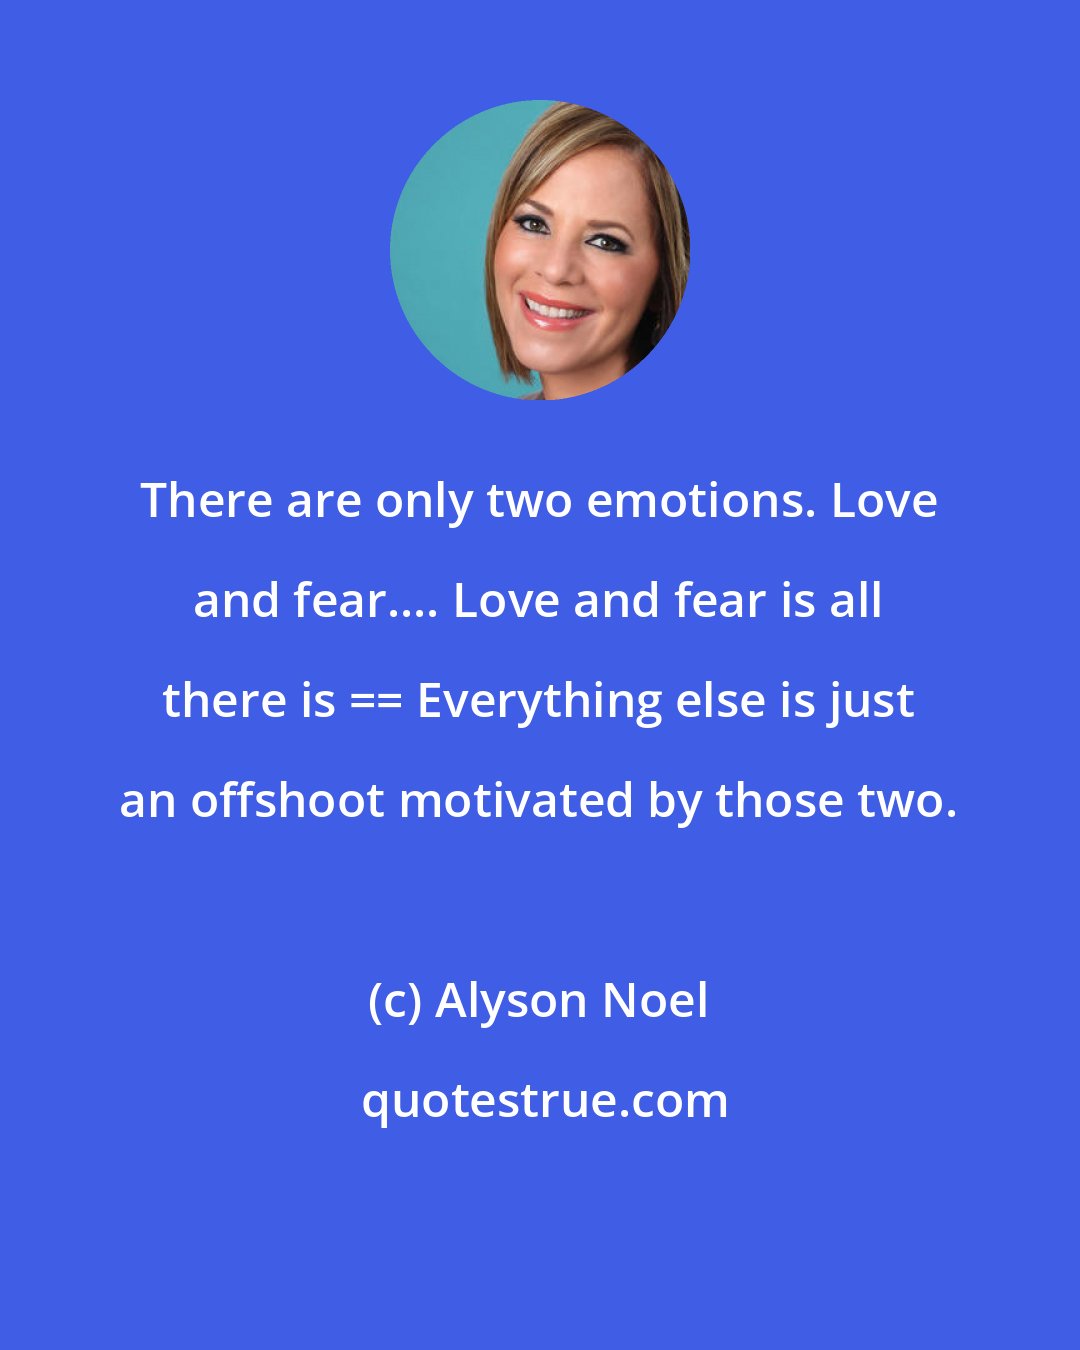 Alyson Noel: There are only two emotions. Love and fear.... Love and fear is all there is == Everything else is just an offshoot motivated by those two.